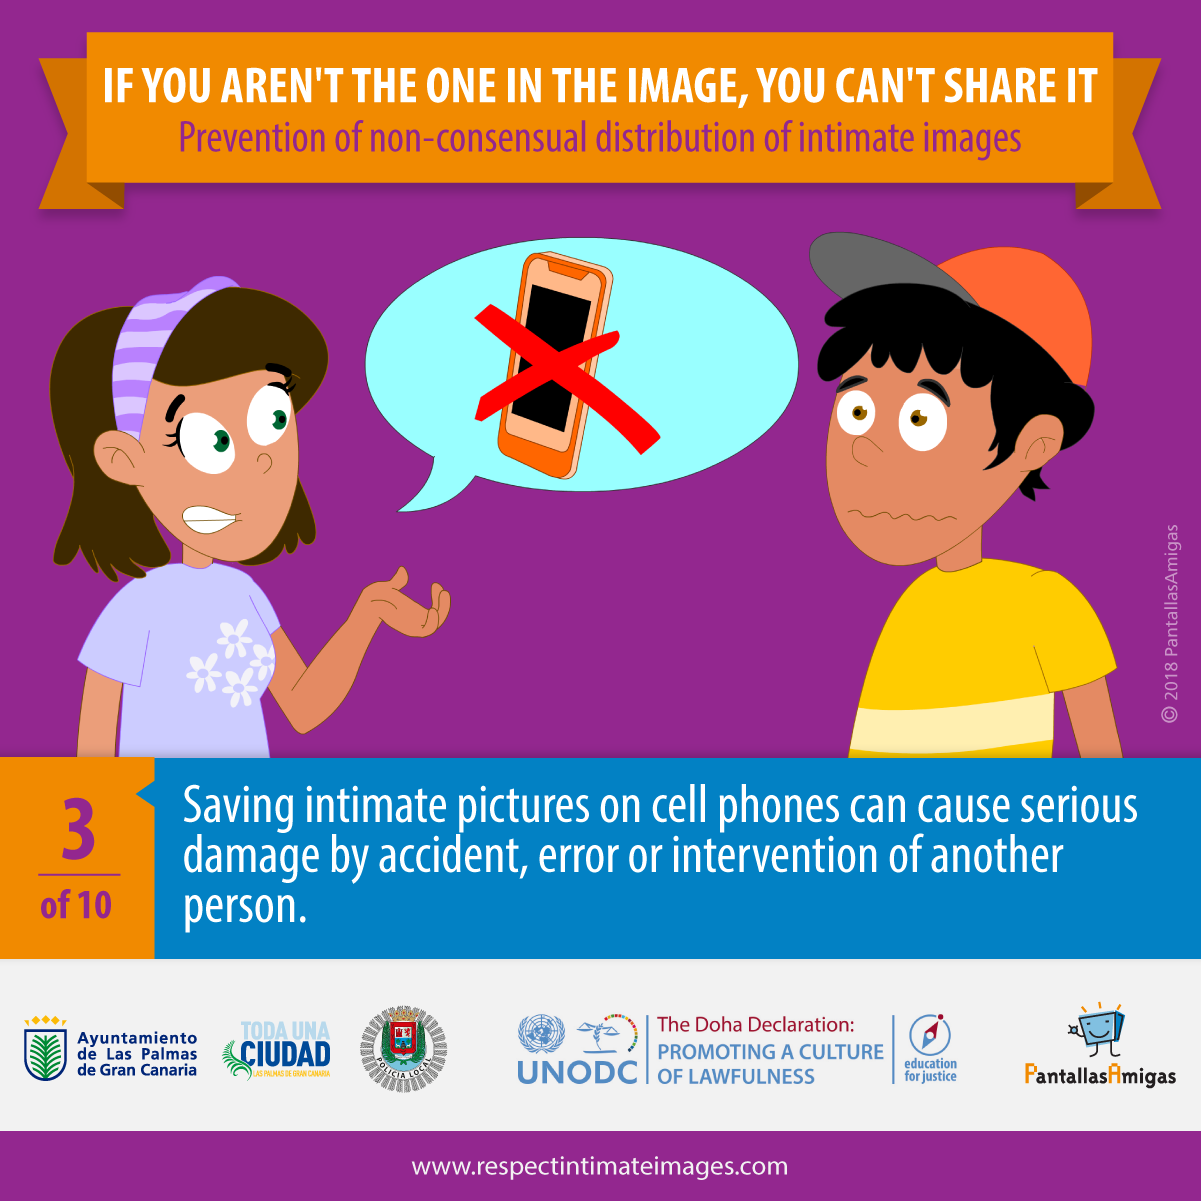 Saving intimate pictures on cell phones can cause serious damage by accident, error or intervention of another person.